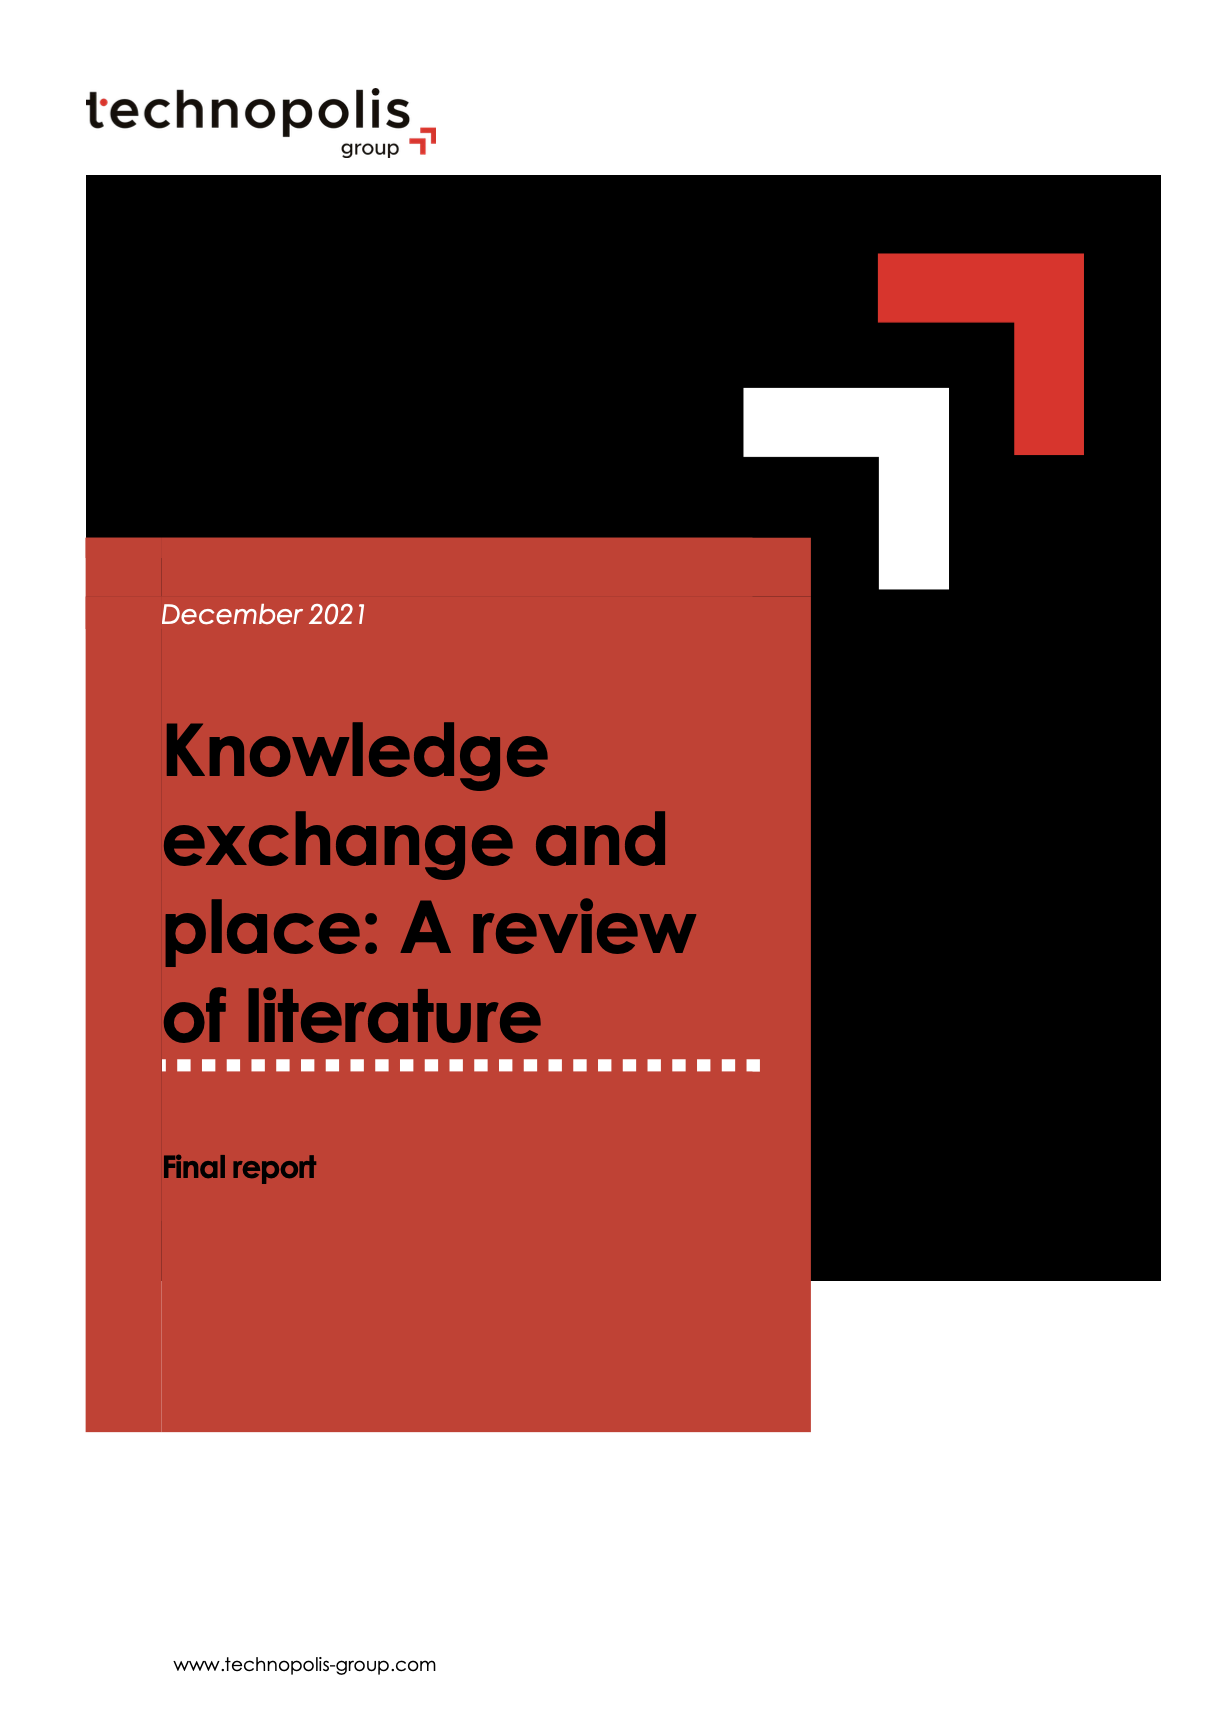 Knowledge exchange and place: A review of literature